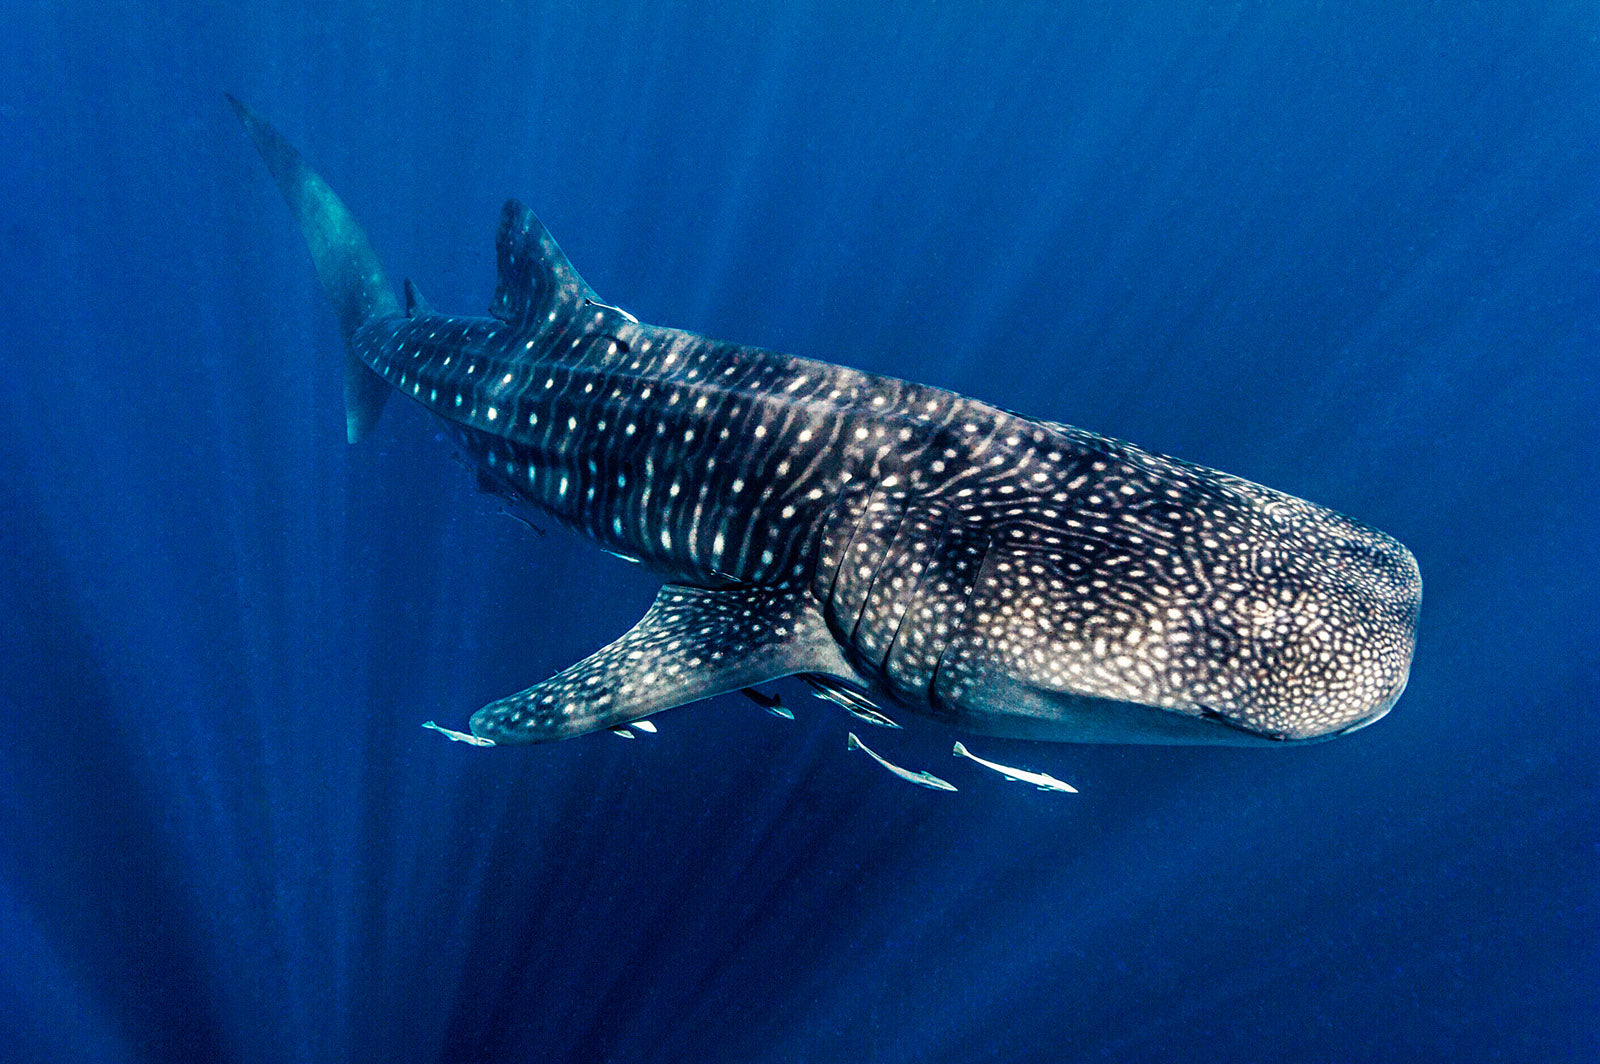 A close encounter with Earths largest fish, a Whale Shark. Incredibly, this species has barely changed throughout its presence in the fossil record over tens of millions of years.